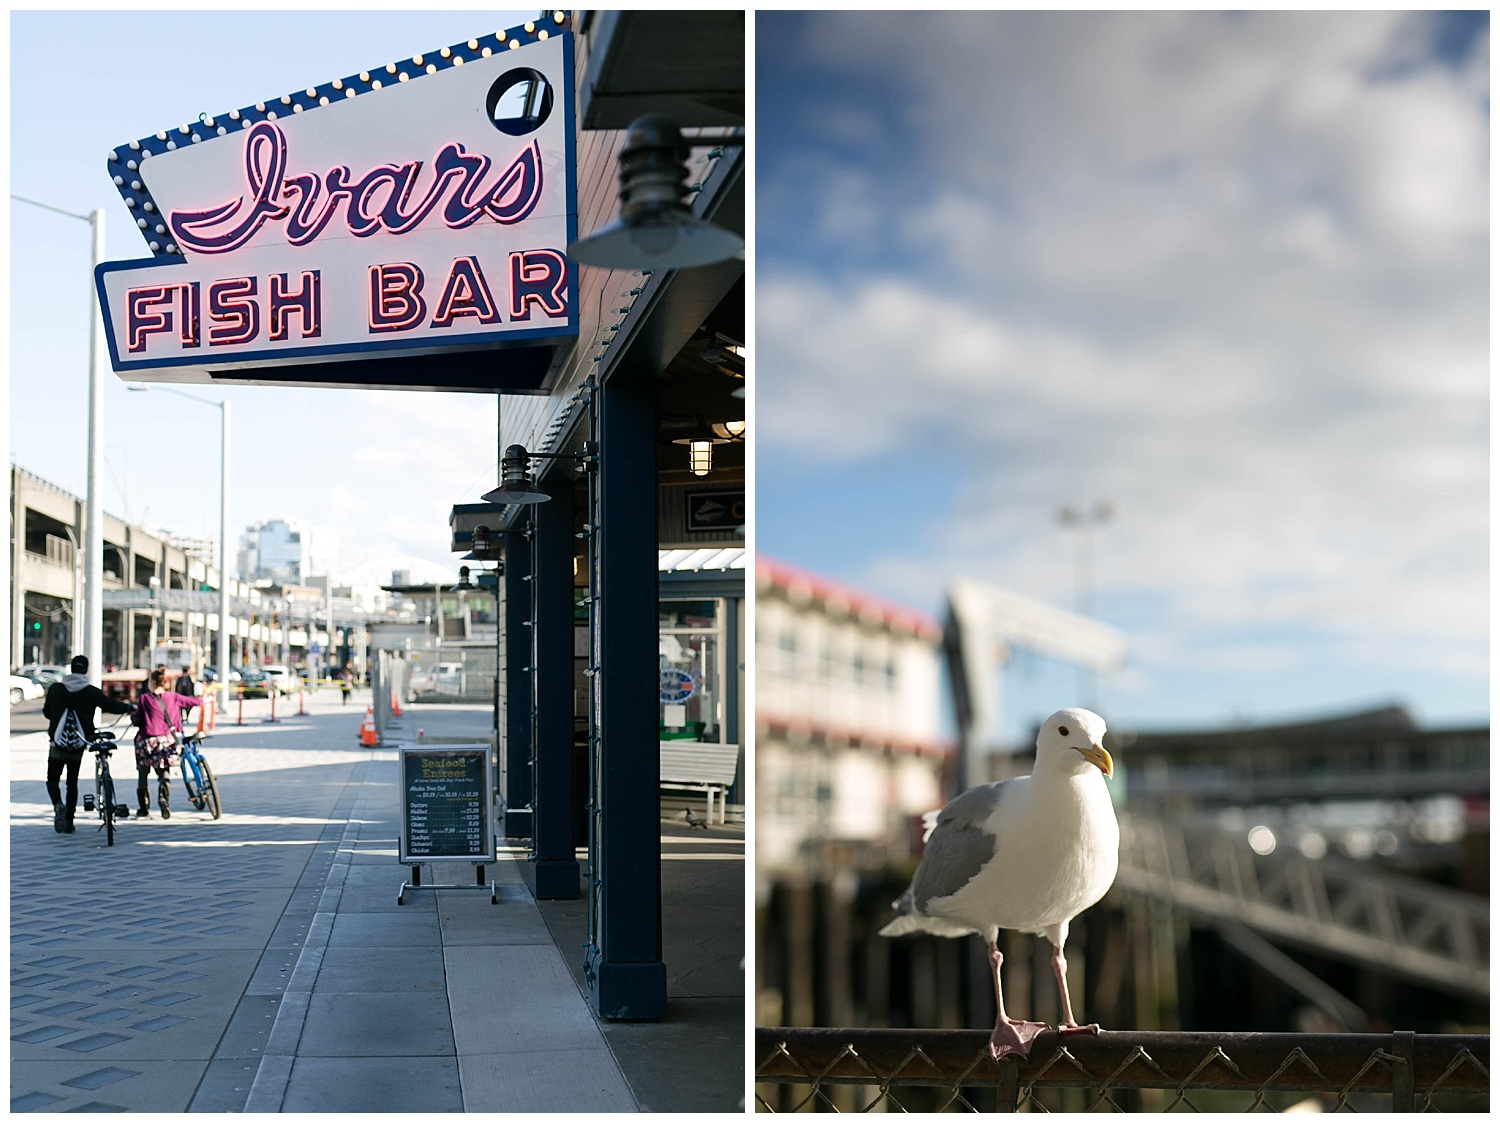  And now we move on to the most magical part of the day.  Ivars Fish Bar  has been around for almost 80 years and it is hard to tell what I loved more... the fish and chips were delicious but the SEAGULLS WERE AMAZING! They are super tame and love french fries almost as much as I do.  